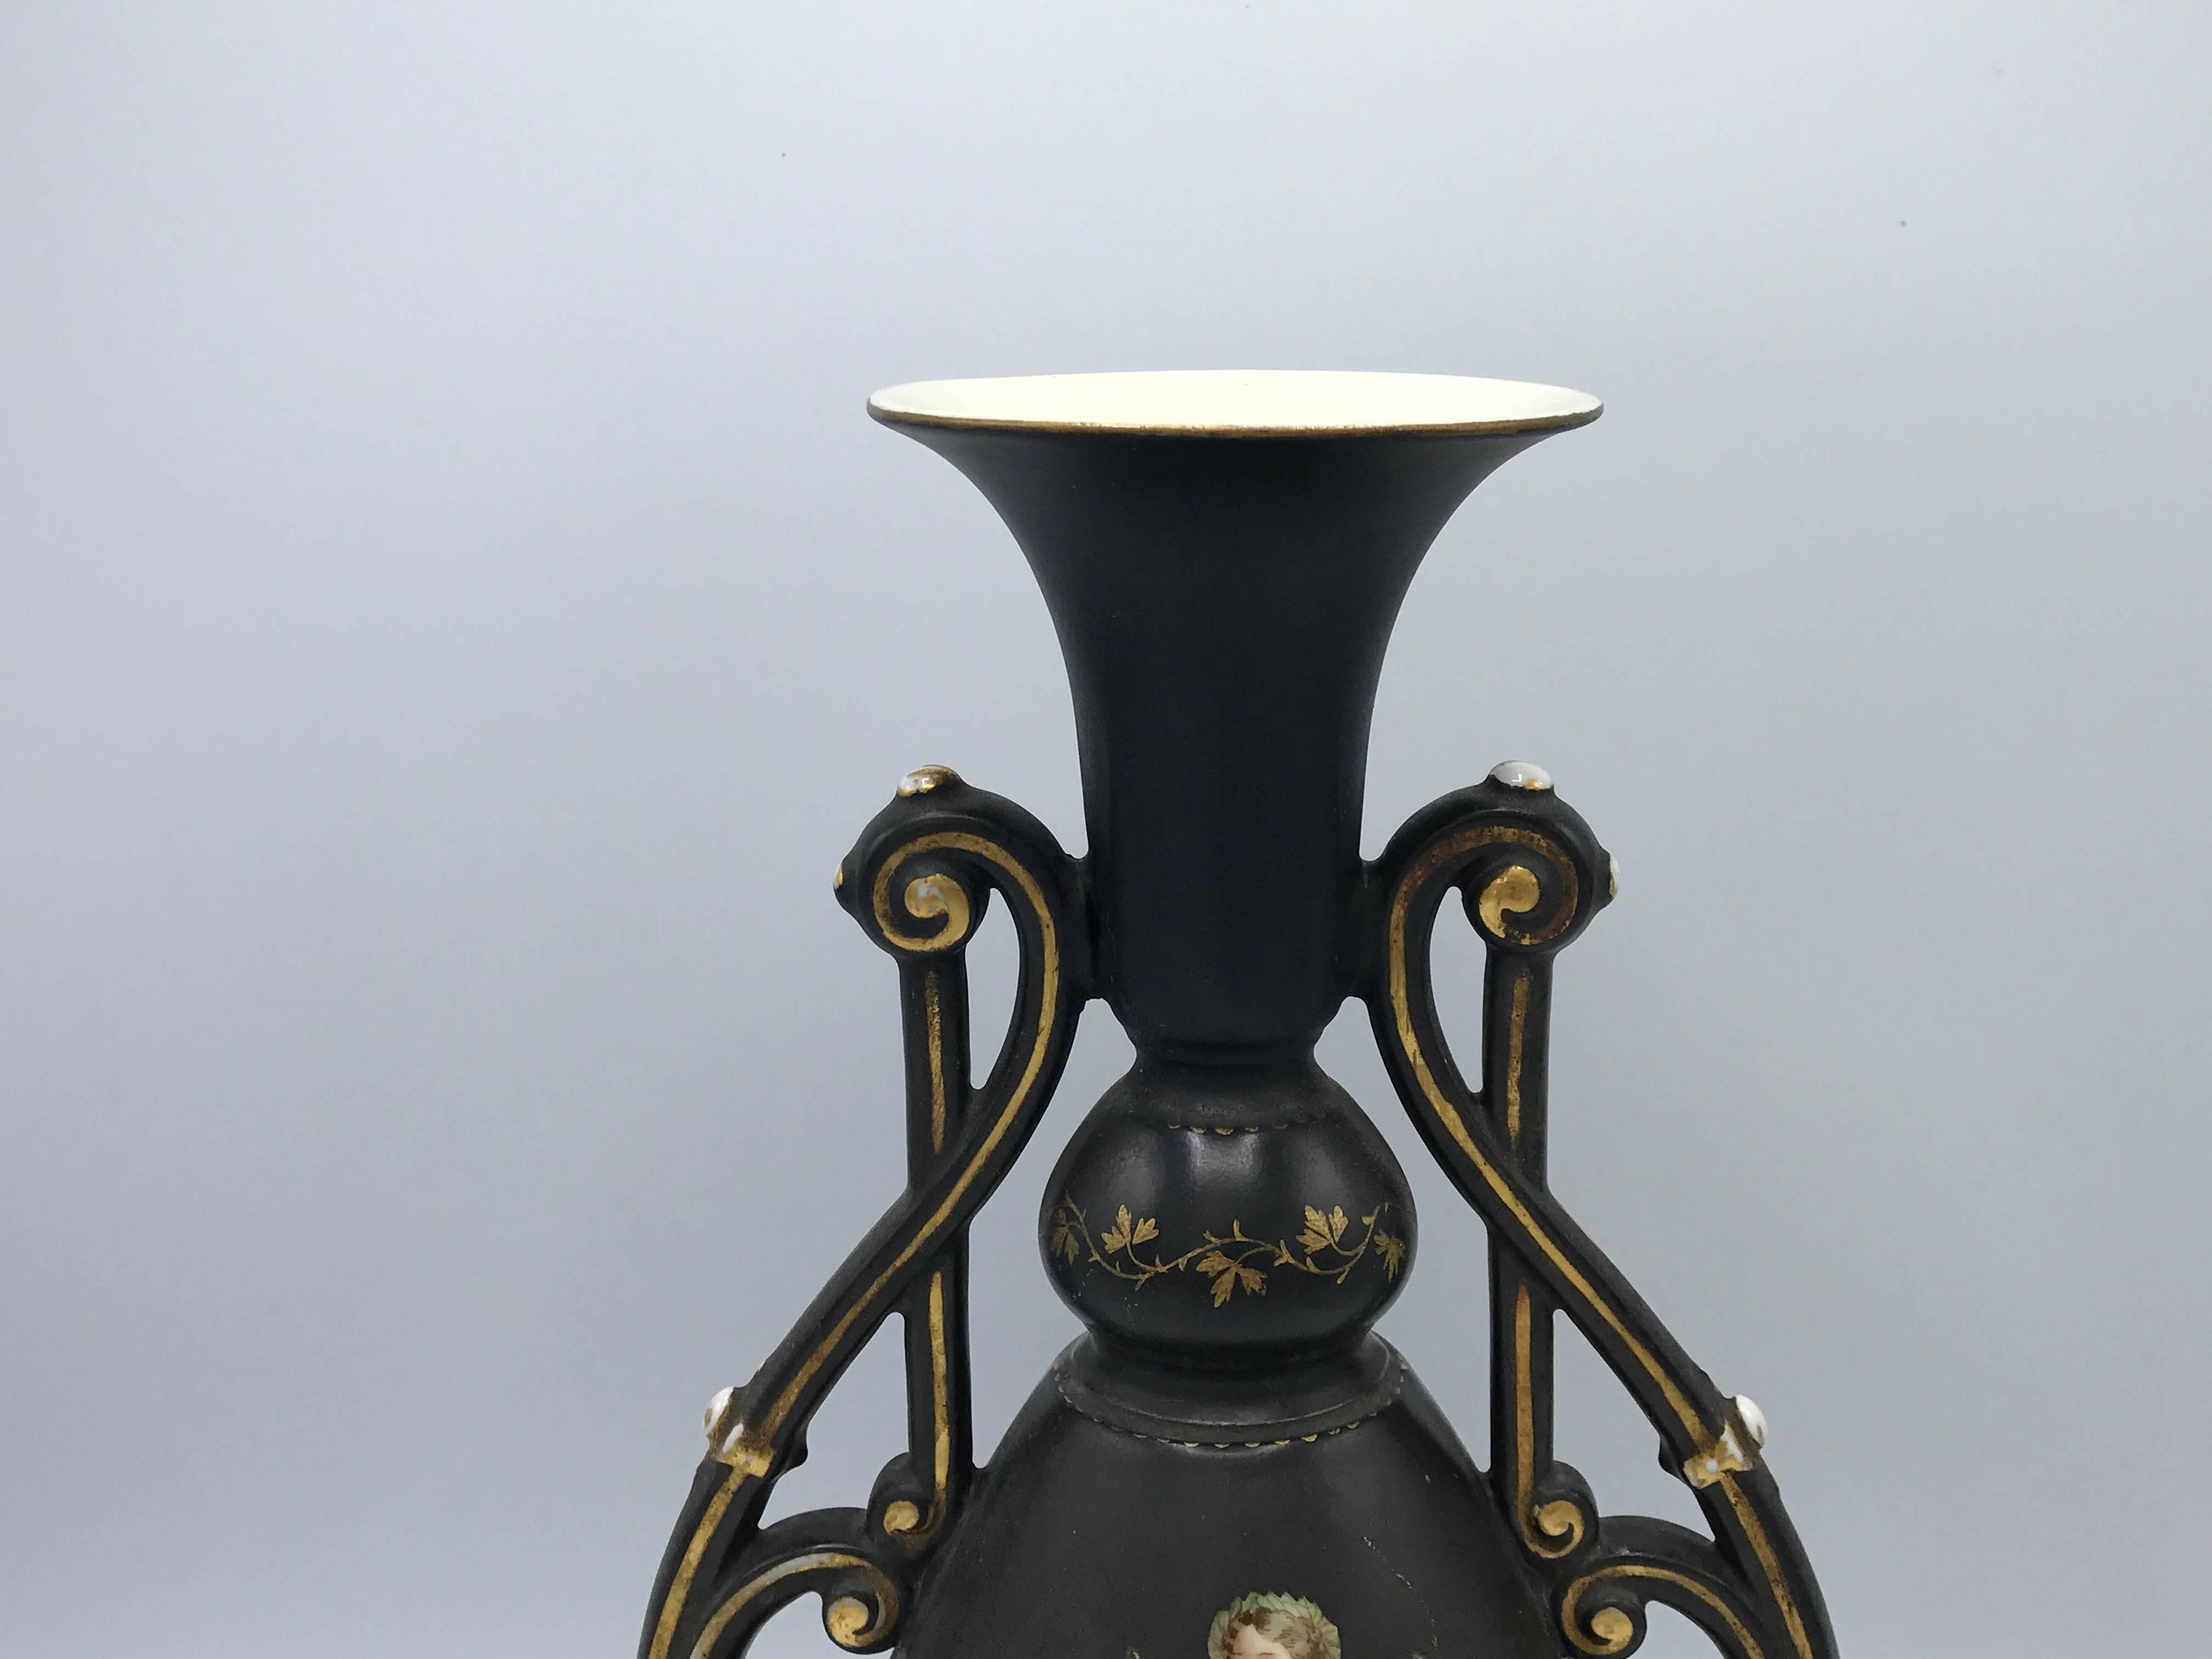 Offered is a gorgeous, 19th century French vase with handles. Hand-painted black with hand-painted gold accents. Woman on front side.